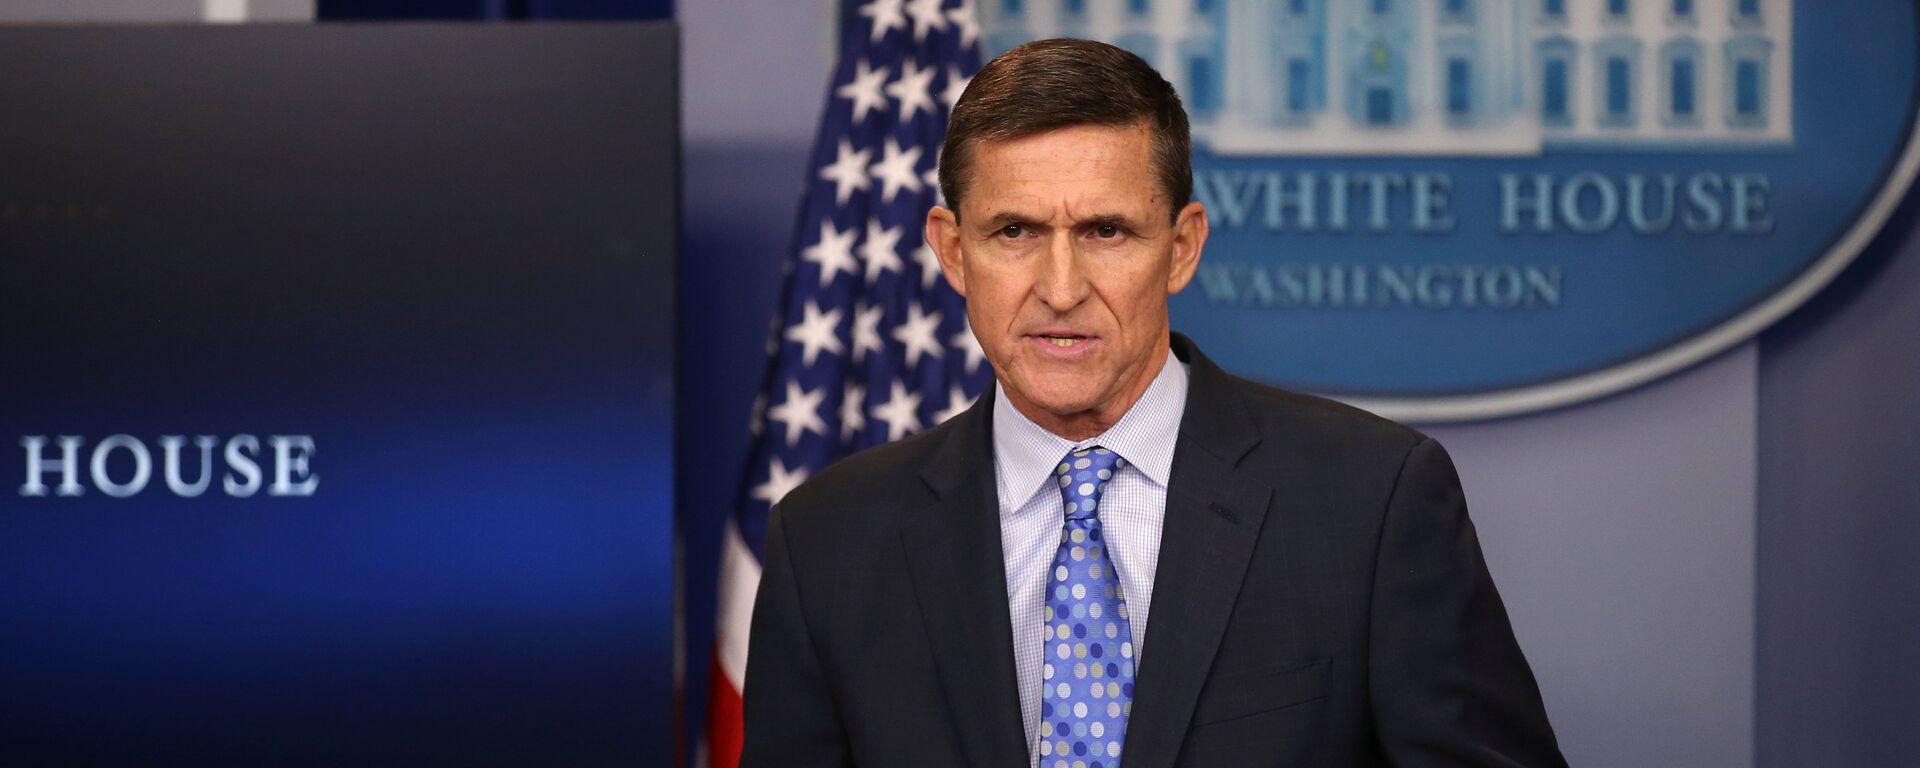 National security adviser General Michael Flynn delivers a statement daily briefing at the White House in Washington U.S., February 1, 2017 - Sputnik International, 1920, 23.12.2021